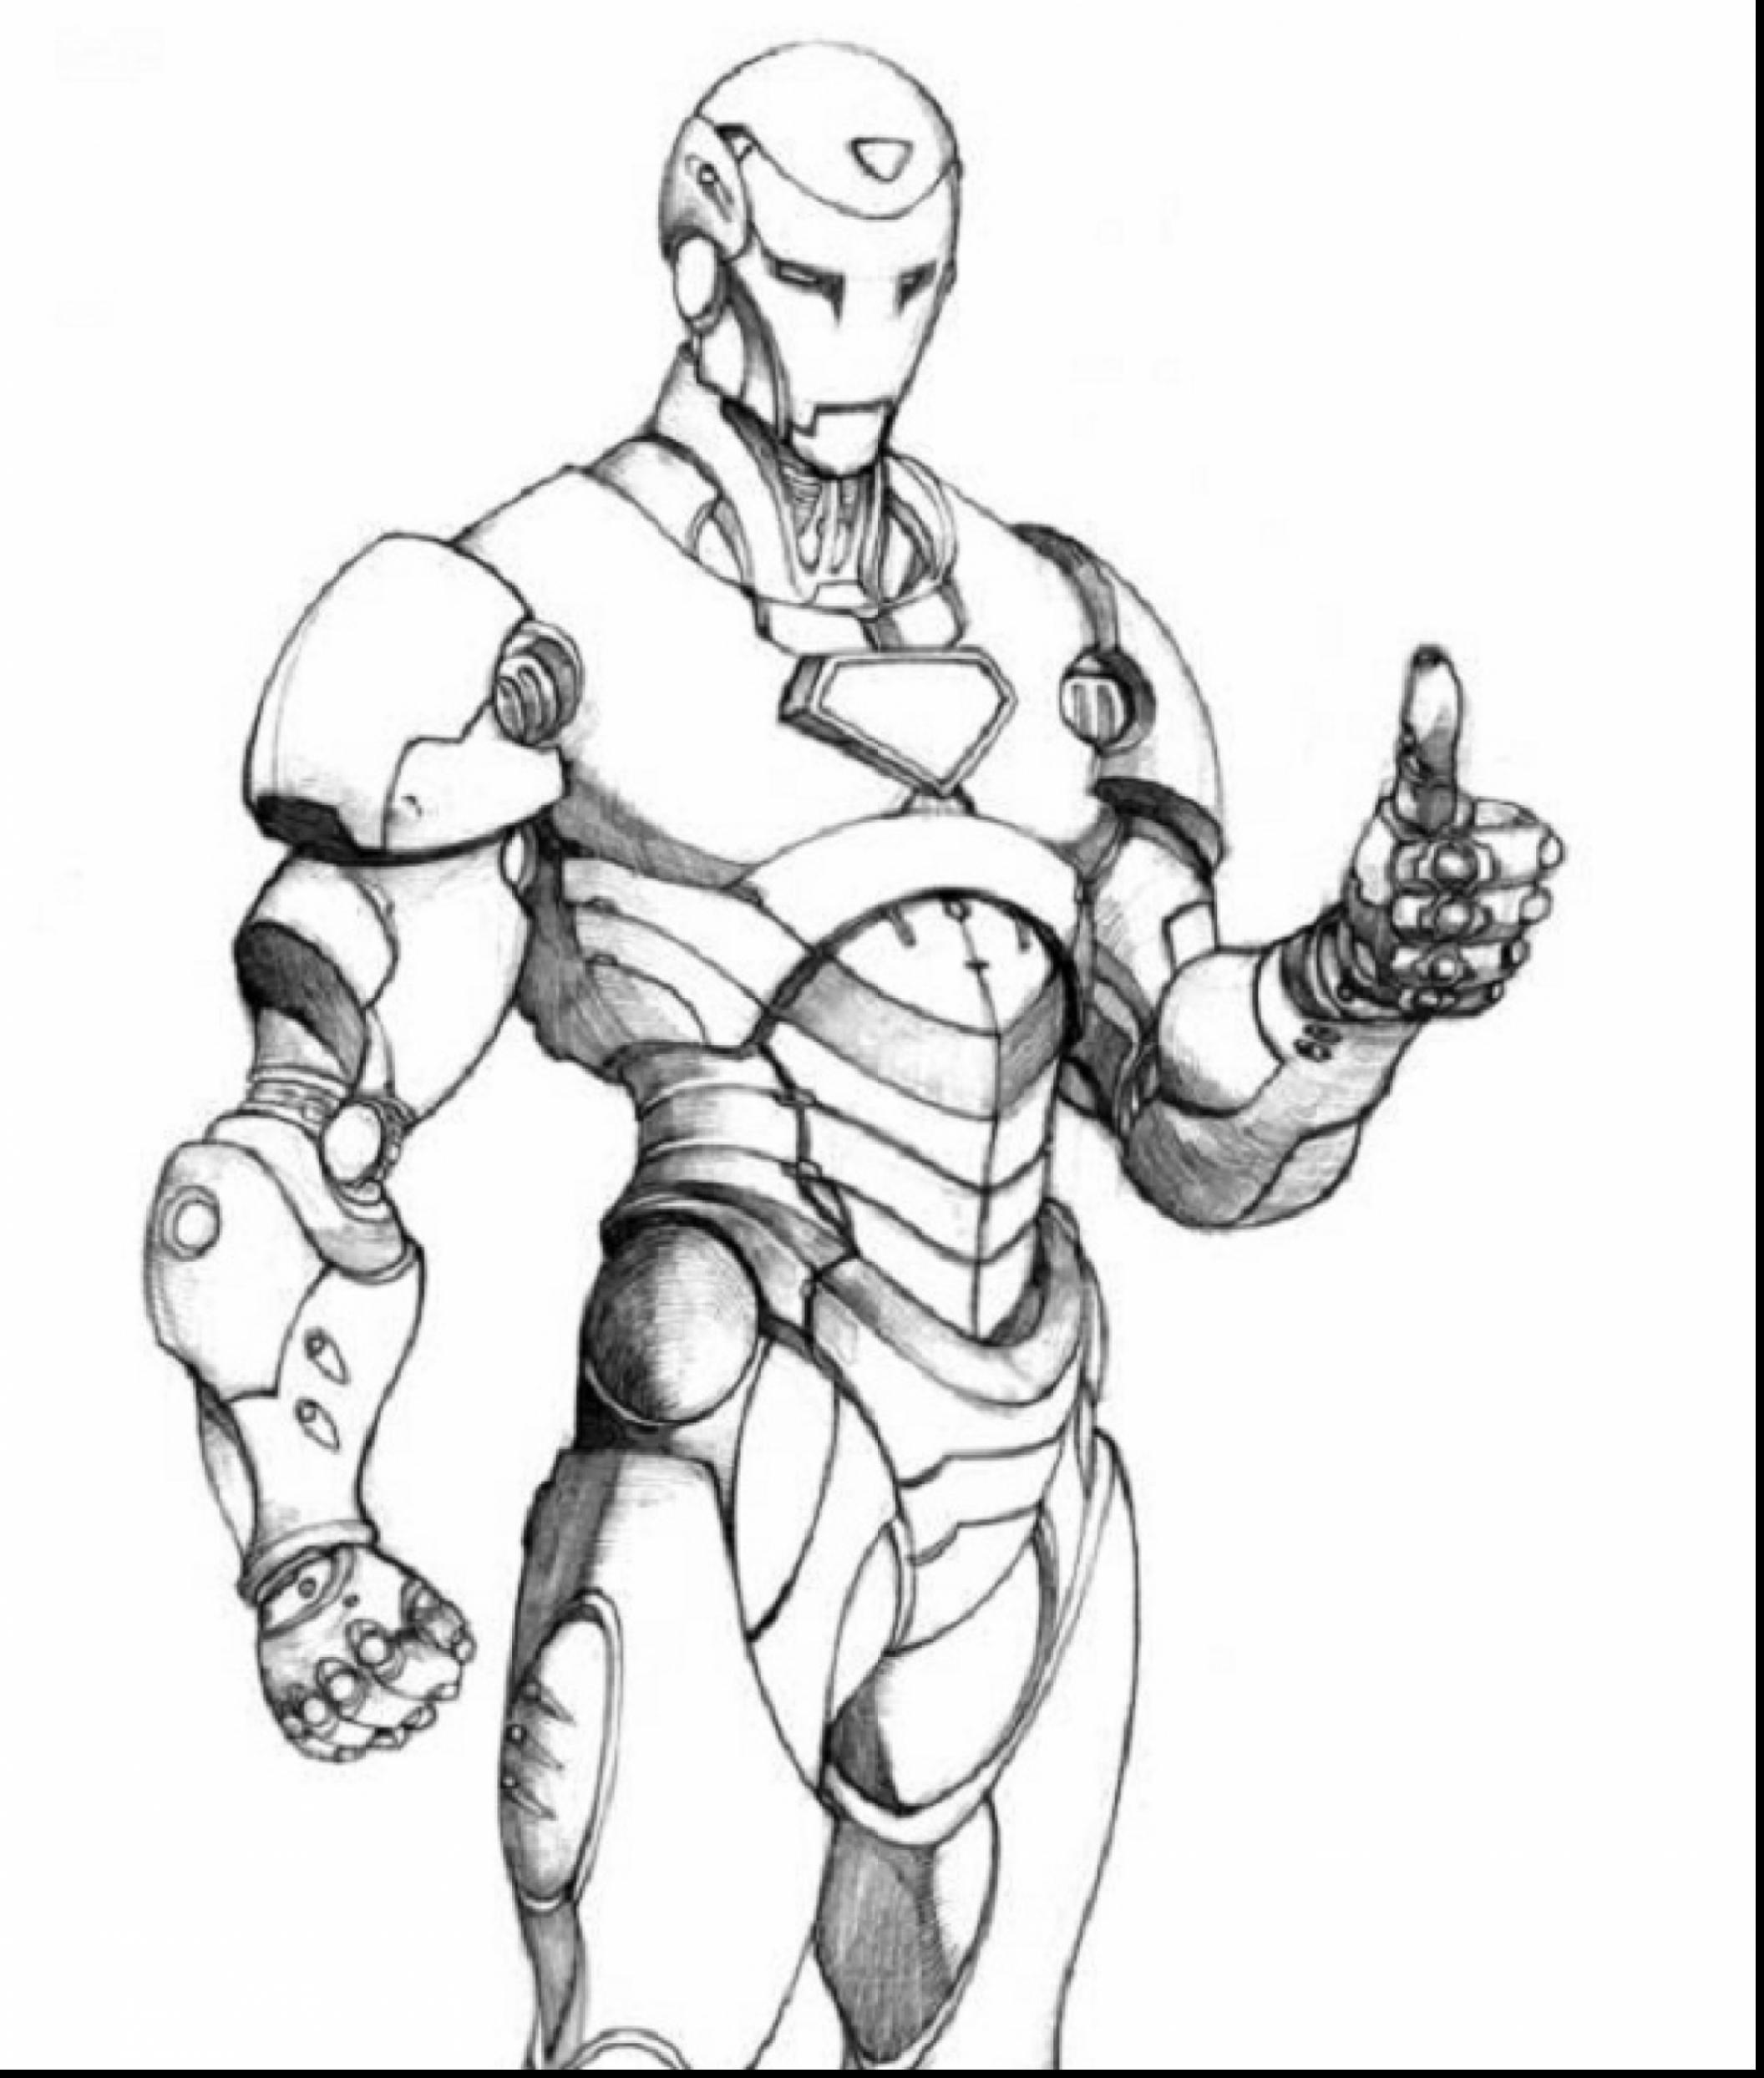 Iron Man Helmet Drawing at GetDrawings.com | Free for ...